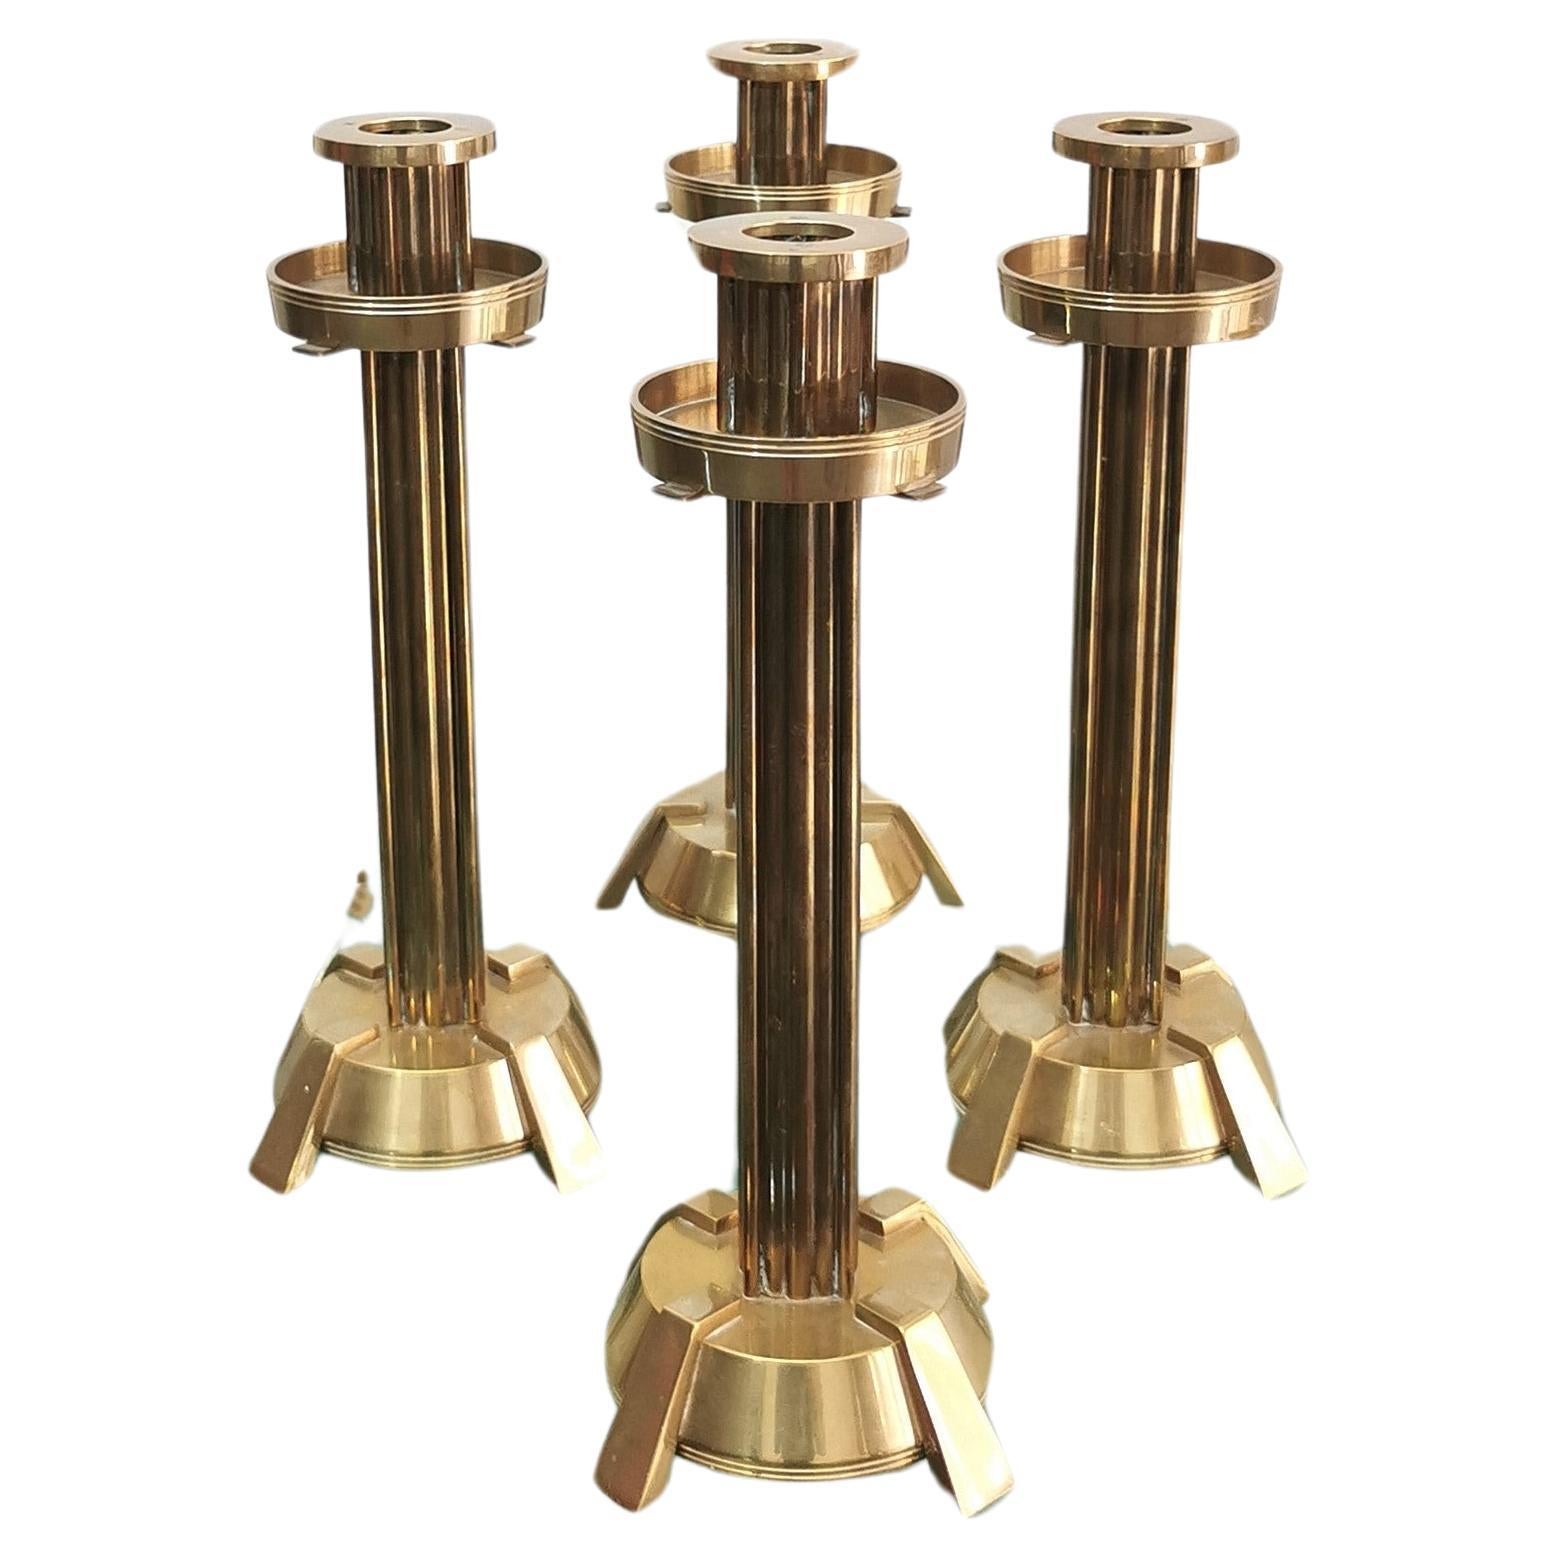 Decorative Object Brass Candelabras Candle Holders Midcentury Italy 70s Set of 4